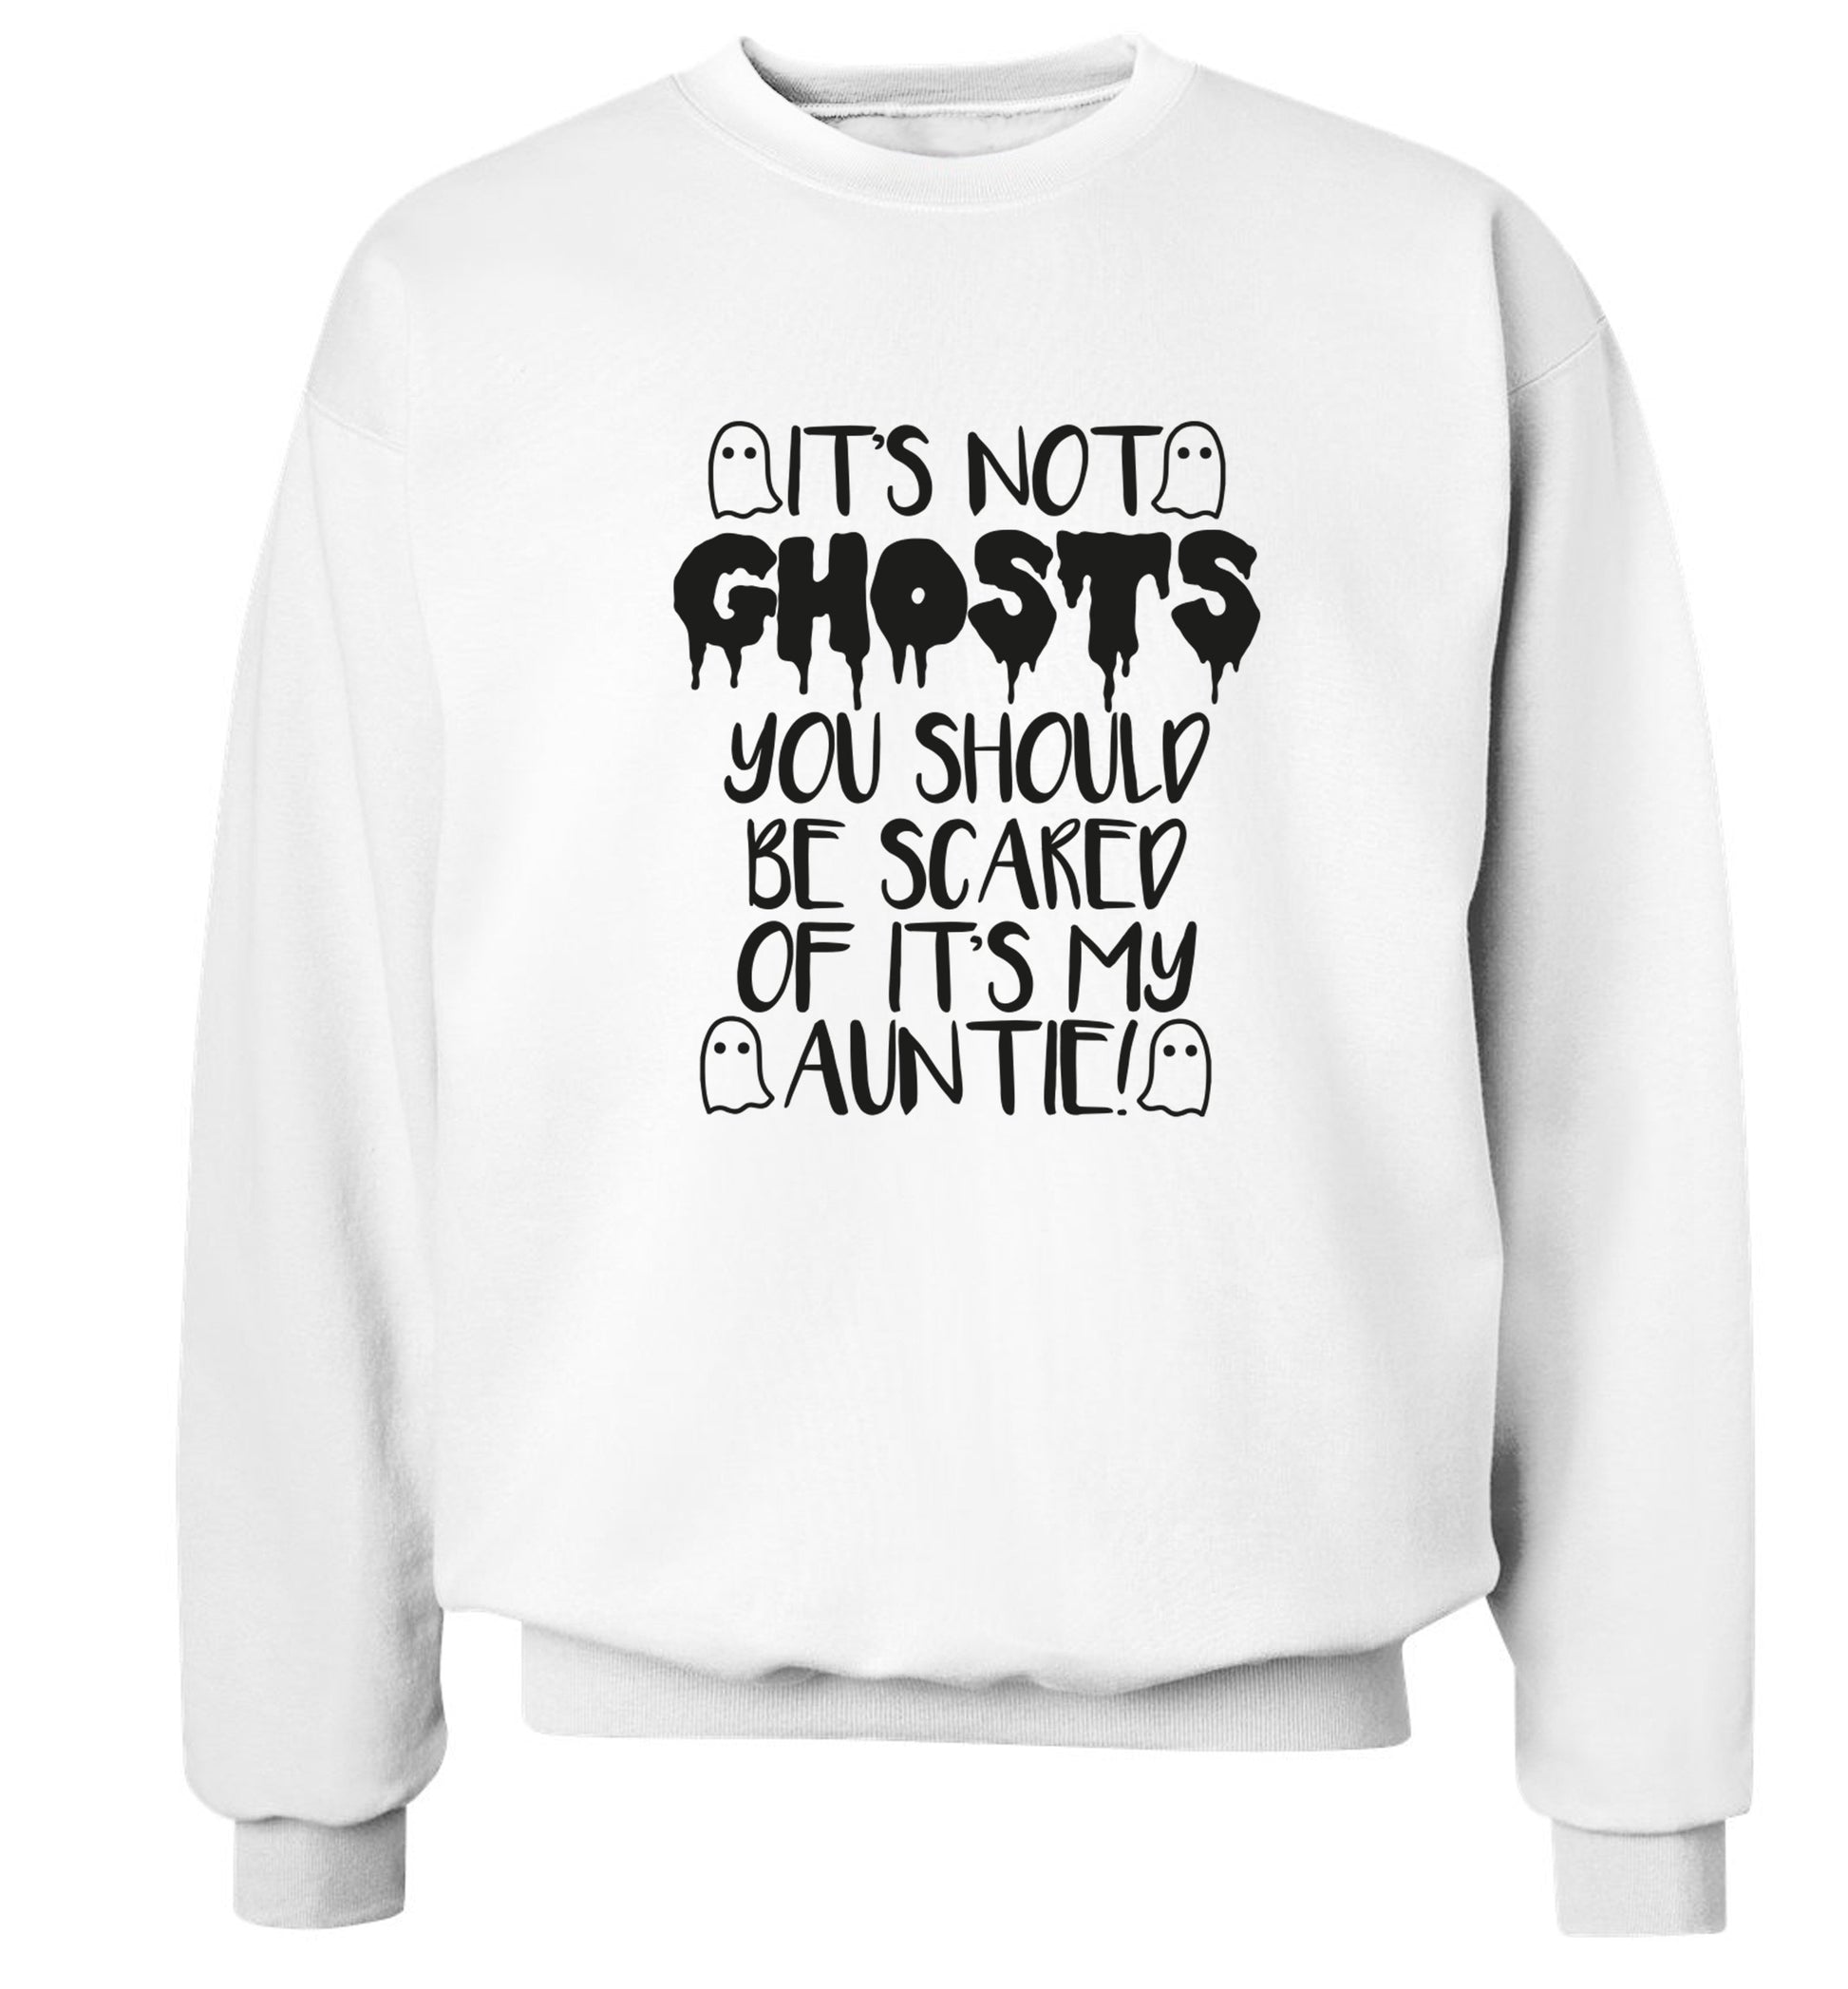 It's not ghosts you should be scared of it's my auntie! Adult's unisex white Sweater 2XL